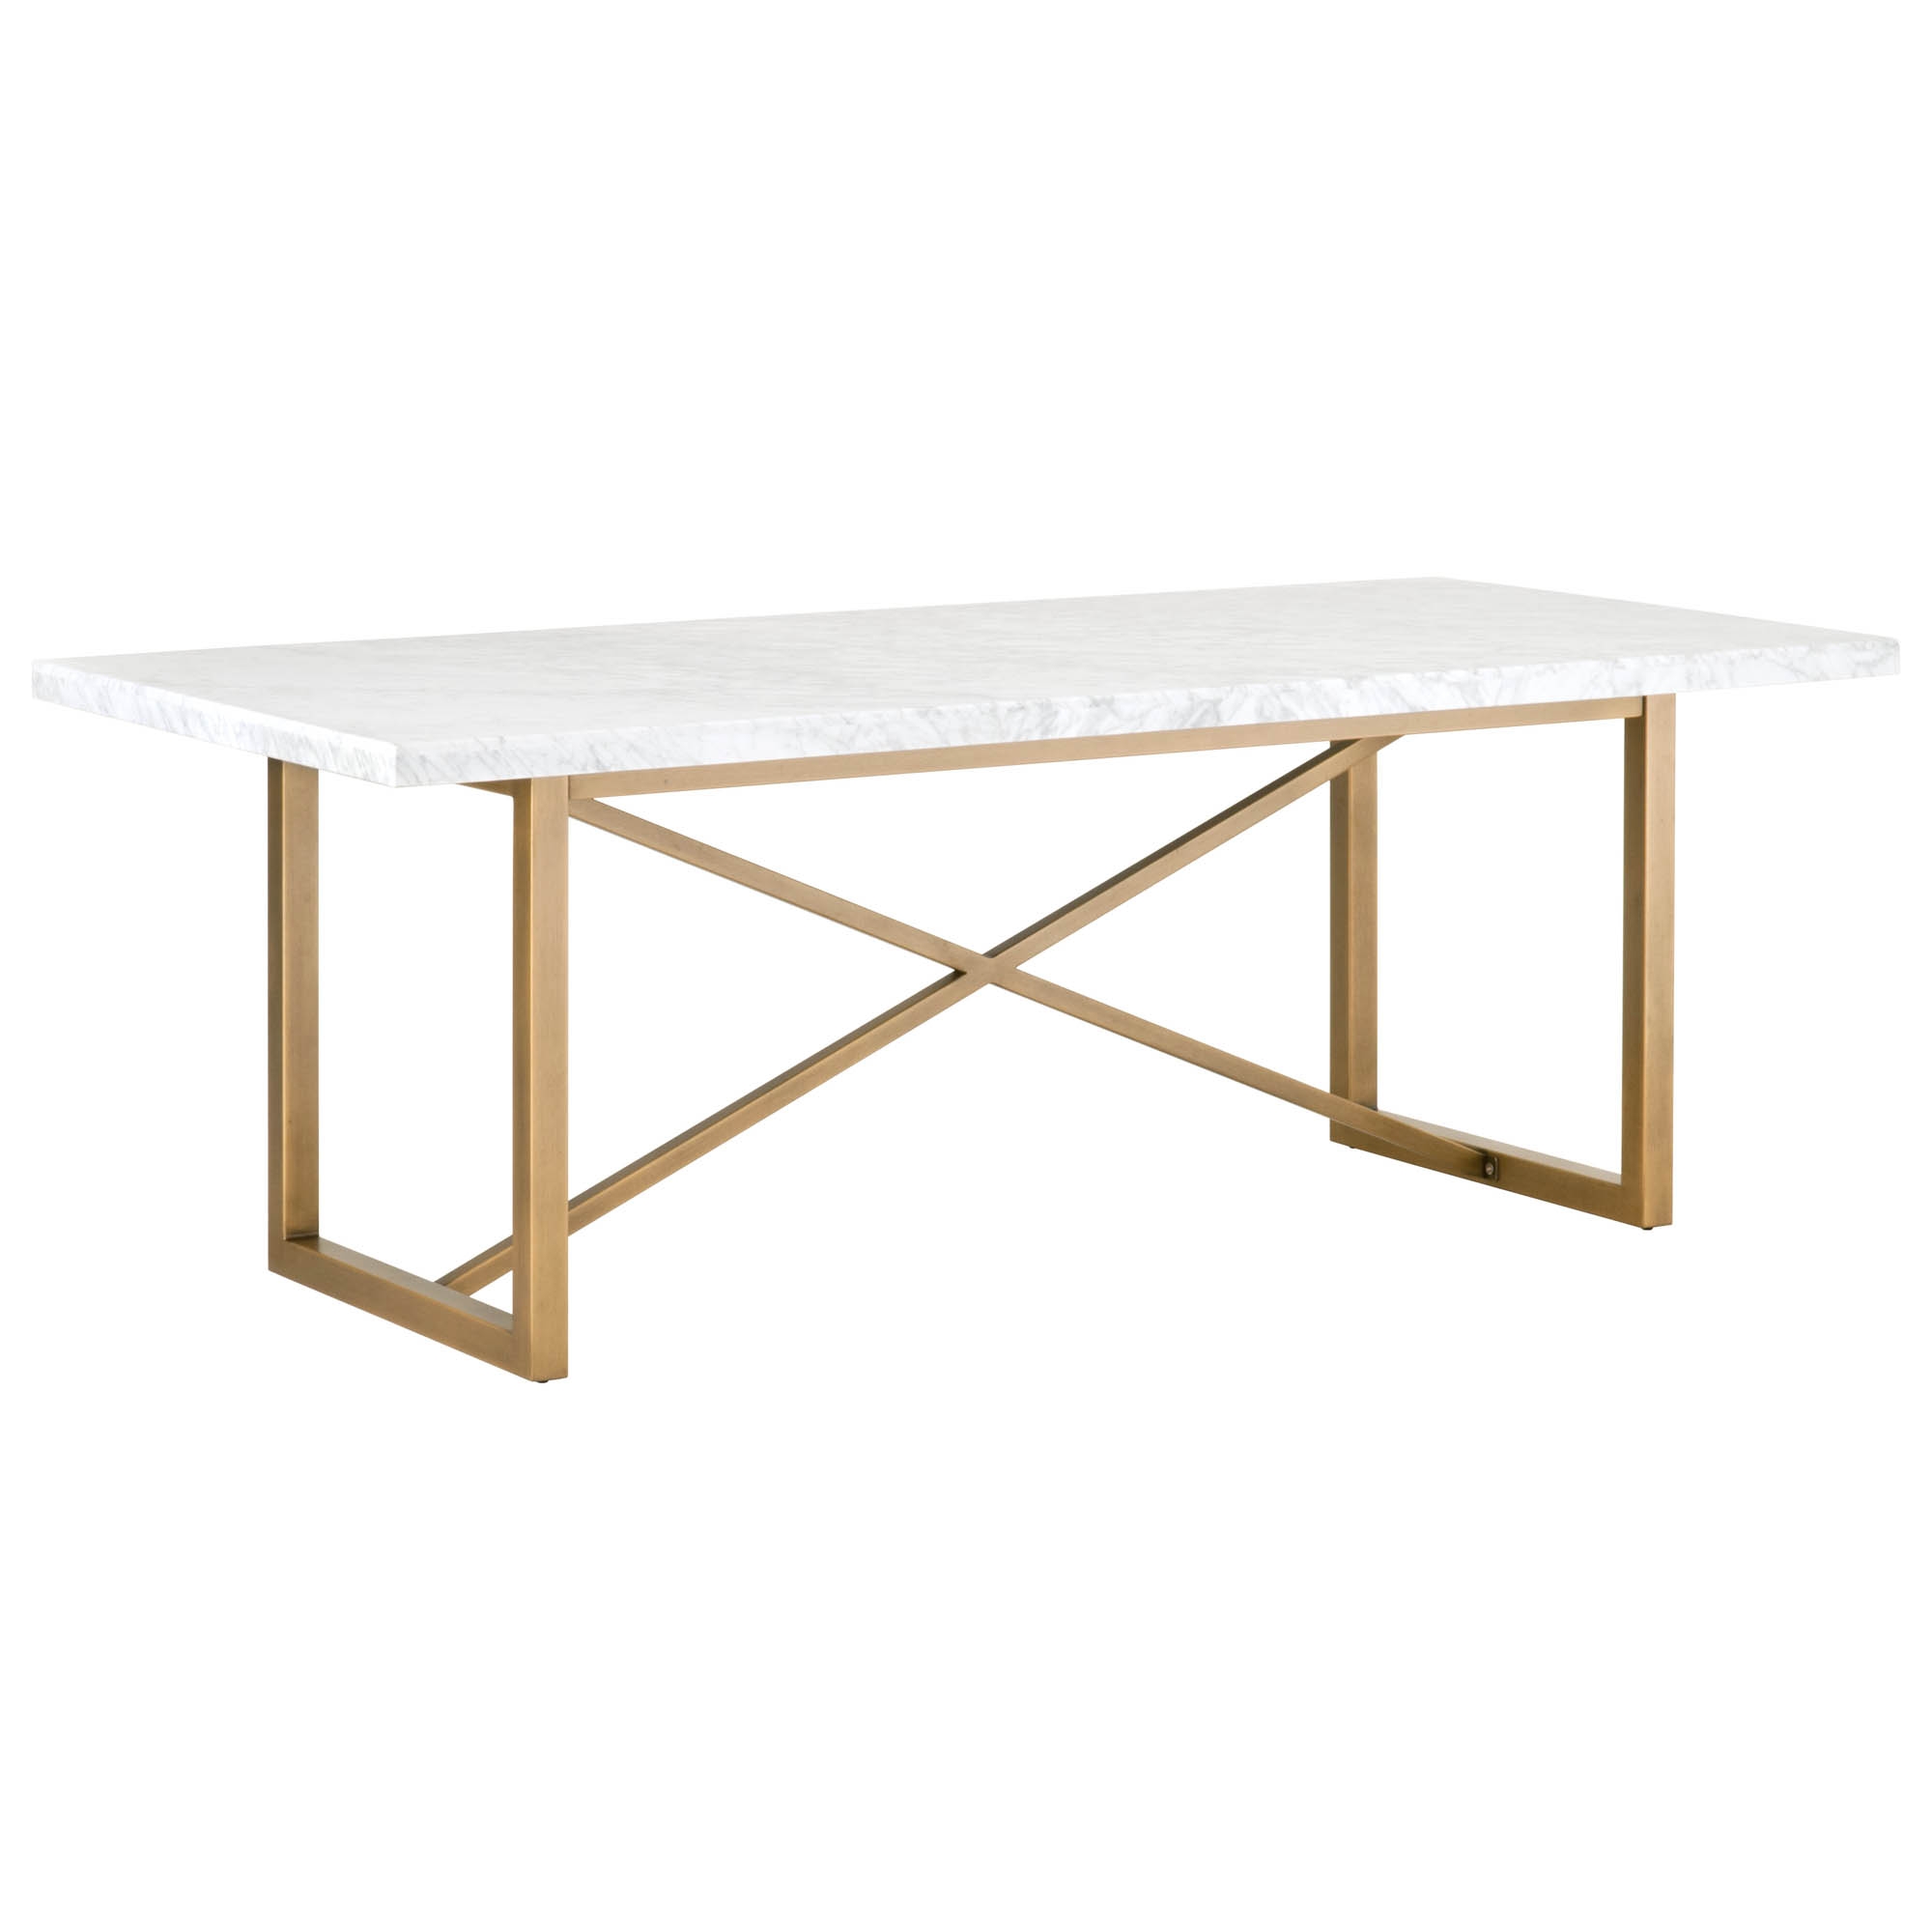 Carrera Dining Table, White & Gold - Image 1